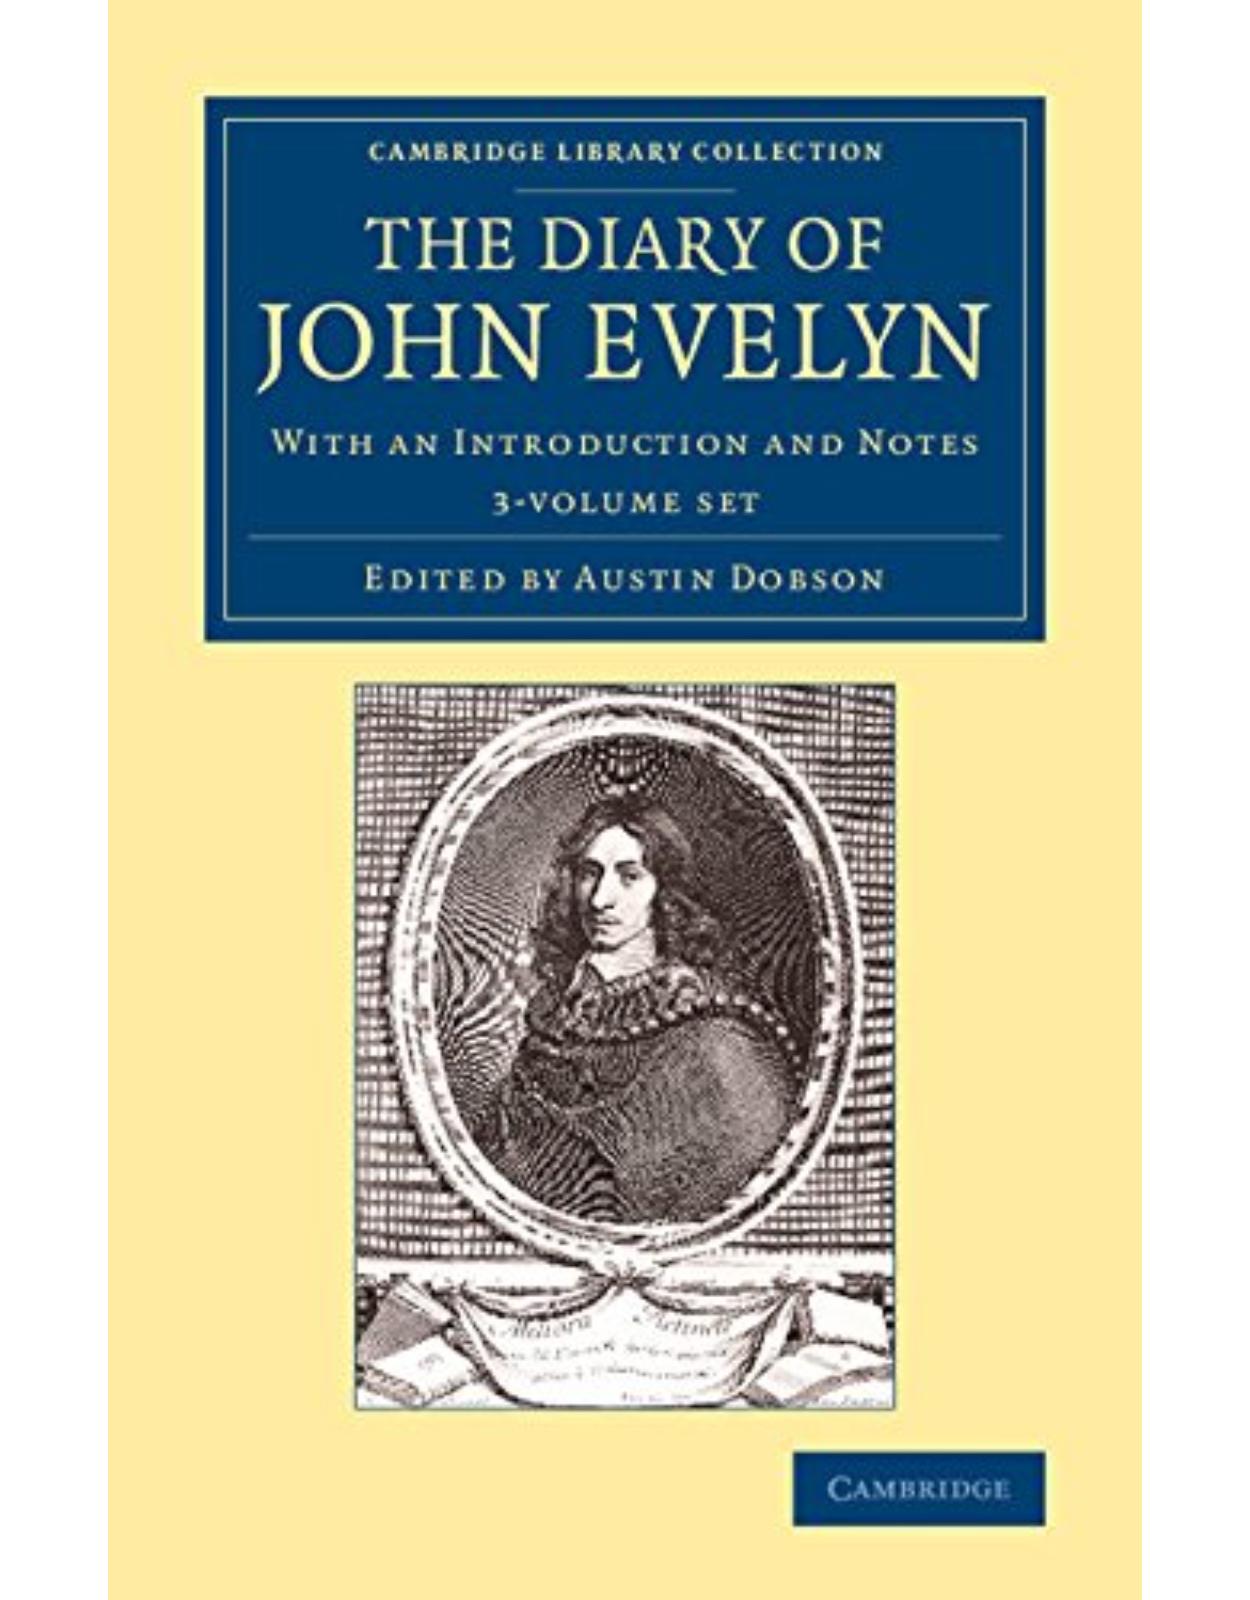 The Diary of John Evelyn 3 Volume Set: With an Introduction and Notes (Cambridge Library Collection - British & Irish History, 17th & 18th Centuries)